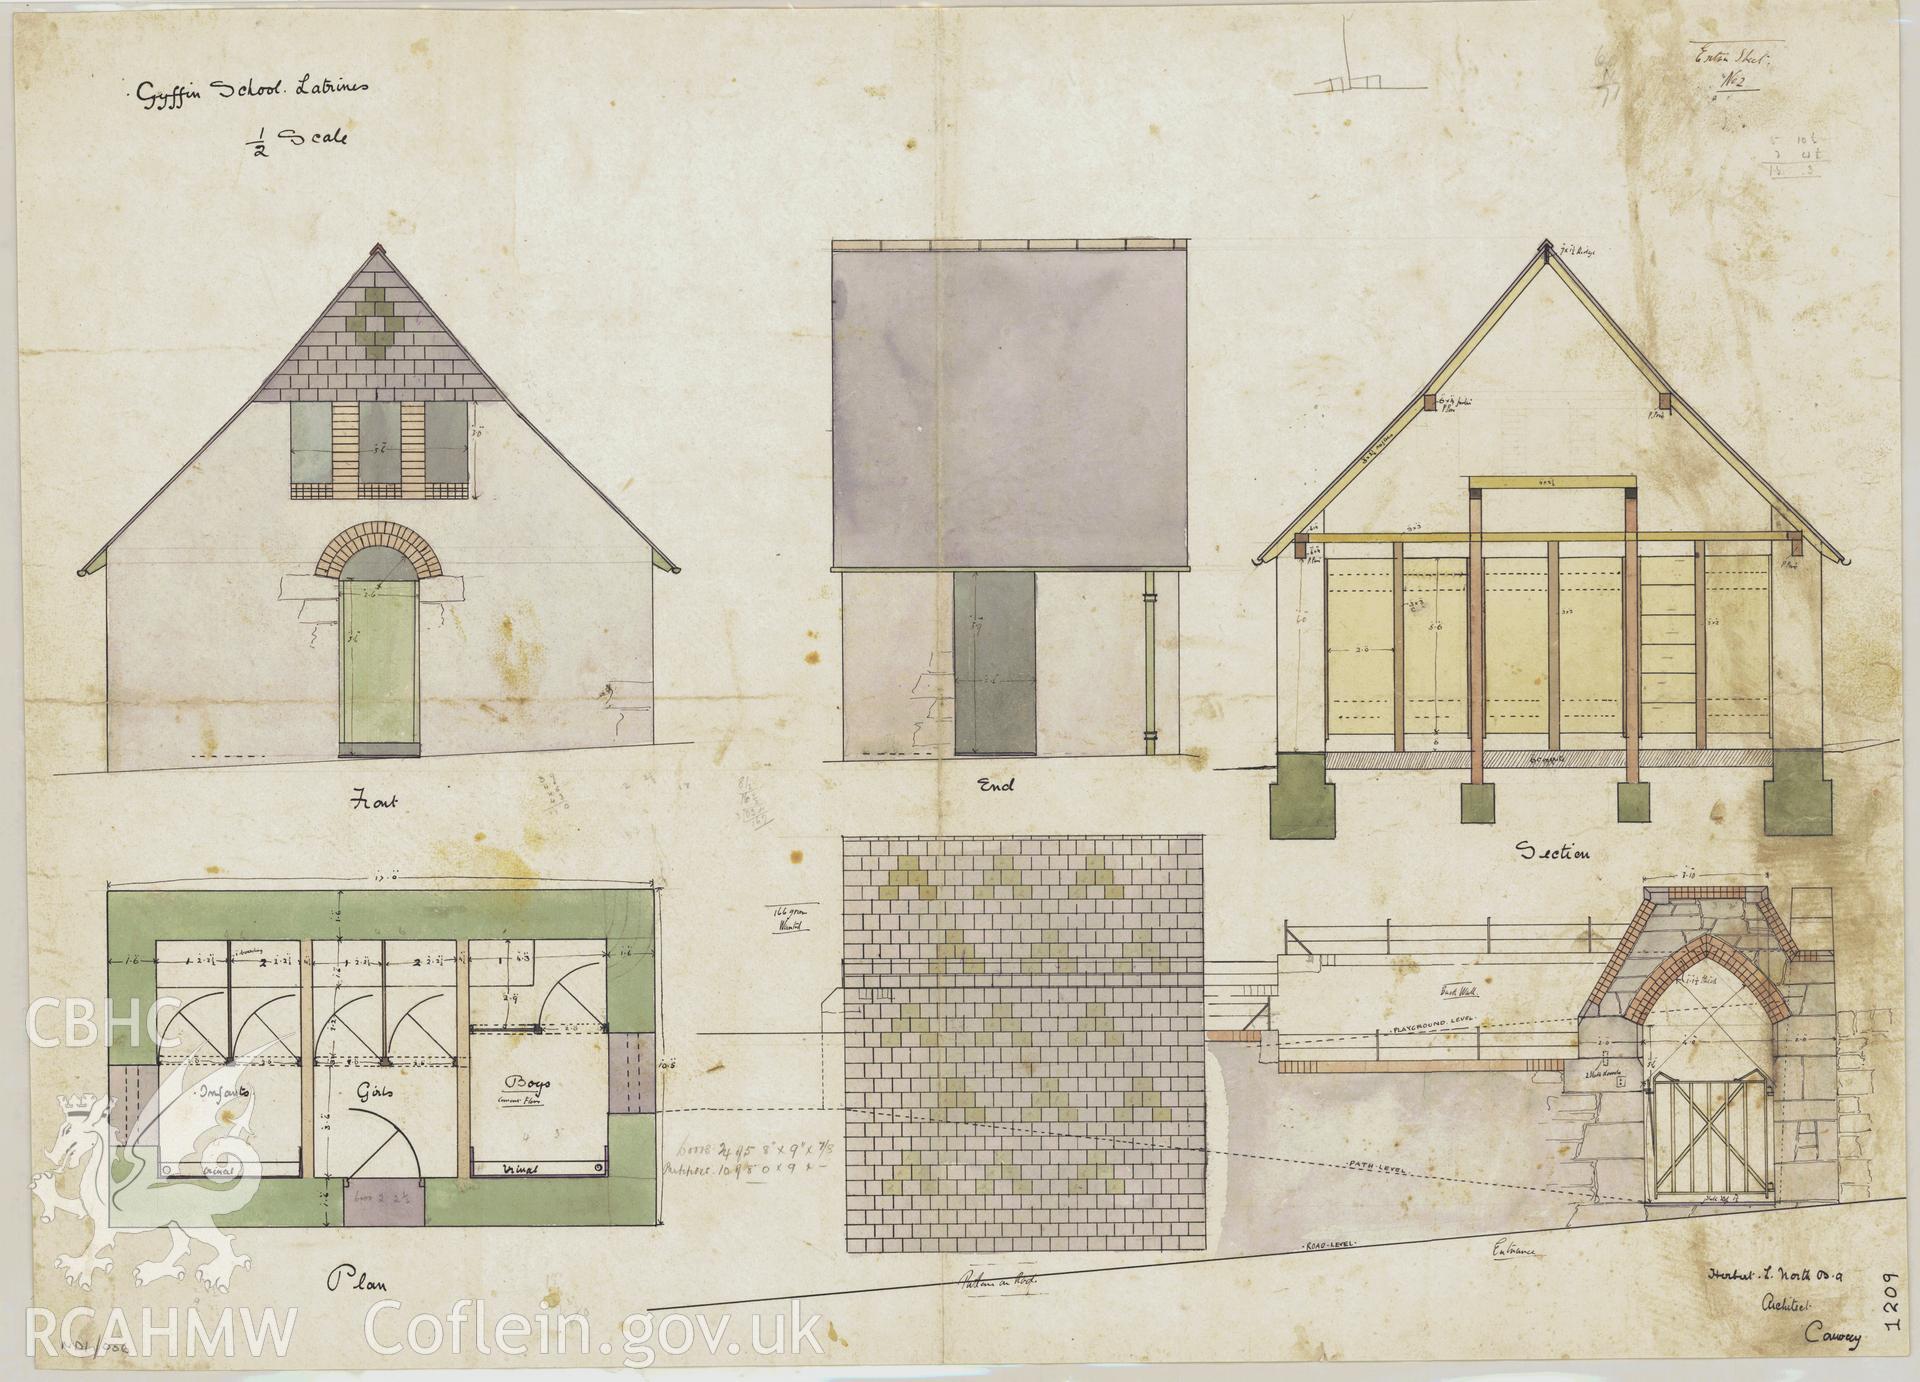 Plans, elevations and section of latrines for Gyffin National School, designed by Herbert L. North, two feet to one inch scale, ink on paper, with colour wash.